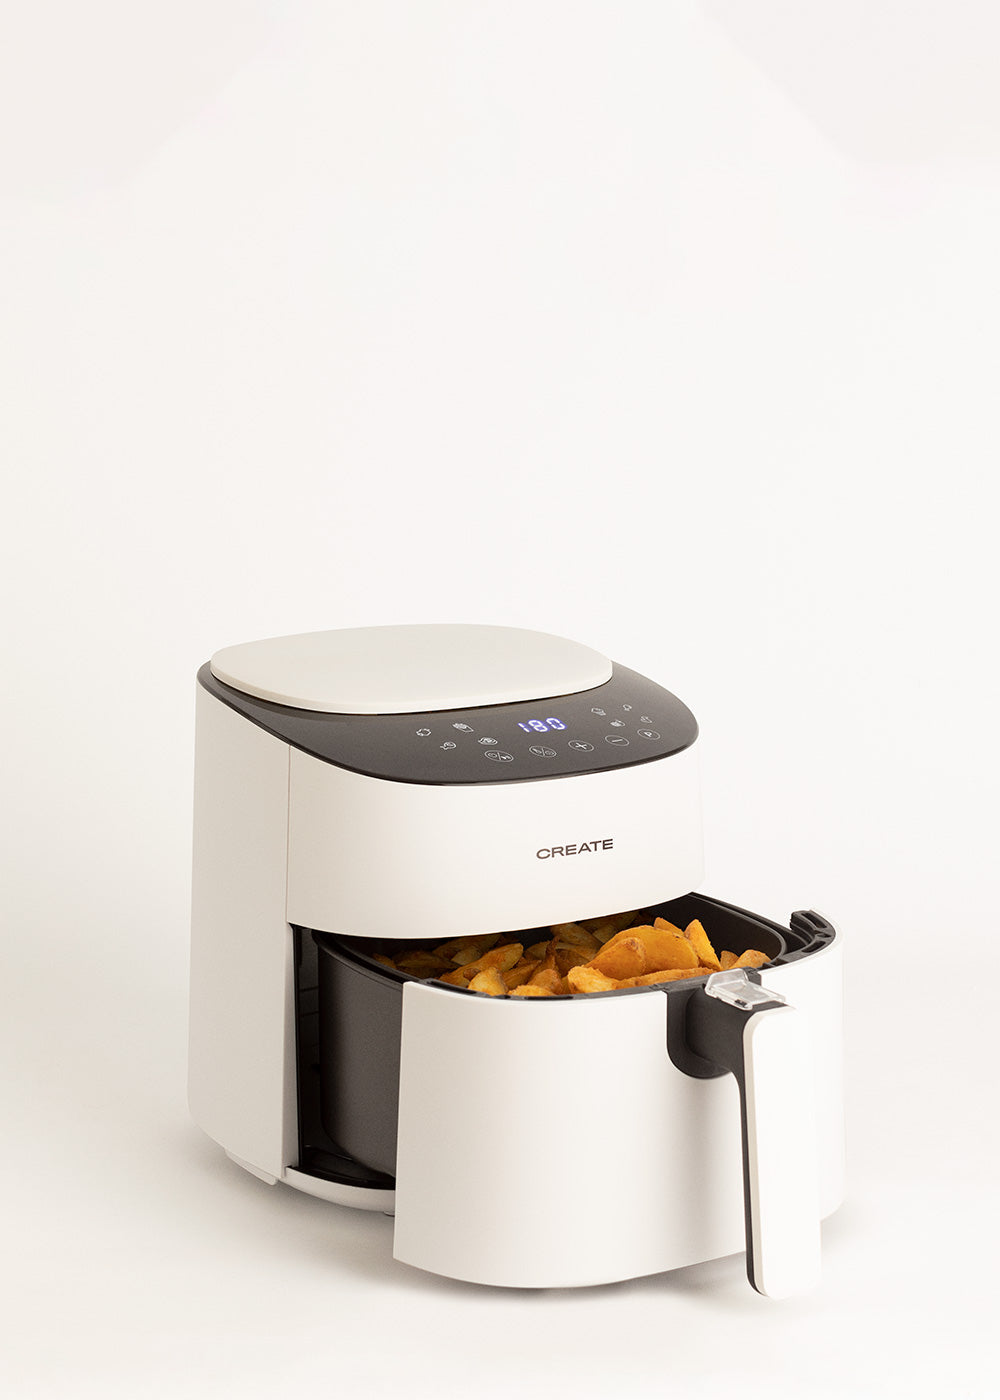 Pack AIR FRYER PRO COMPACT 3.5 L + Accesorios